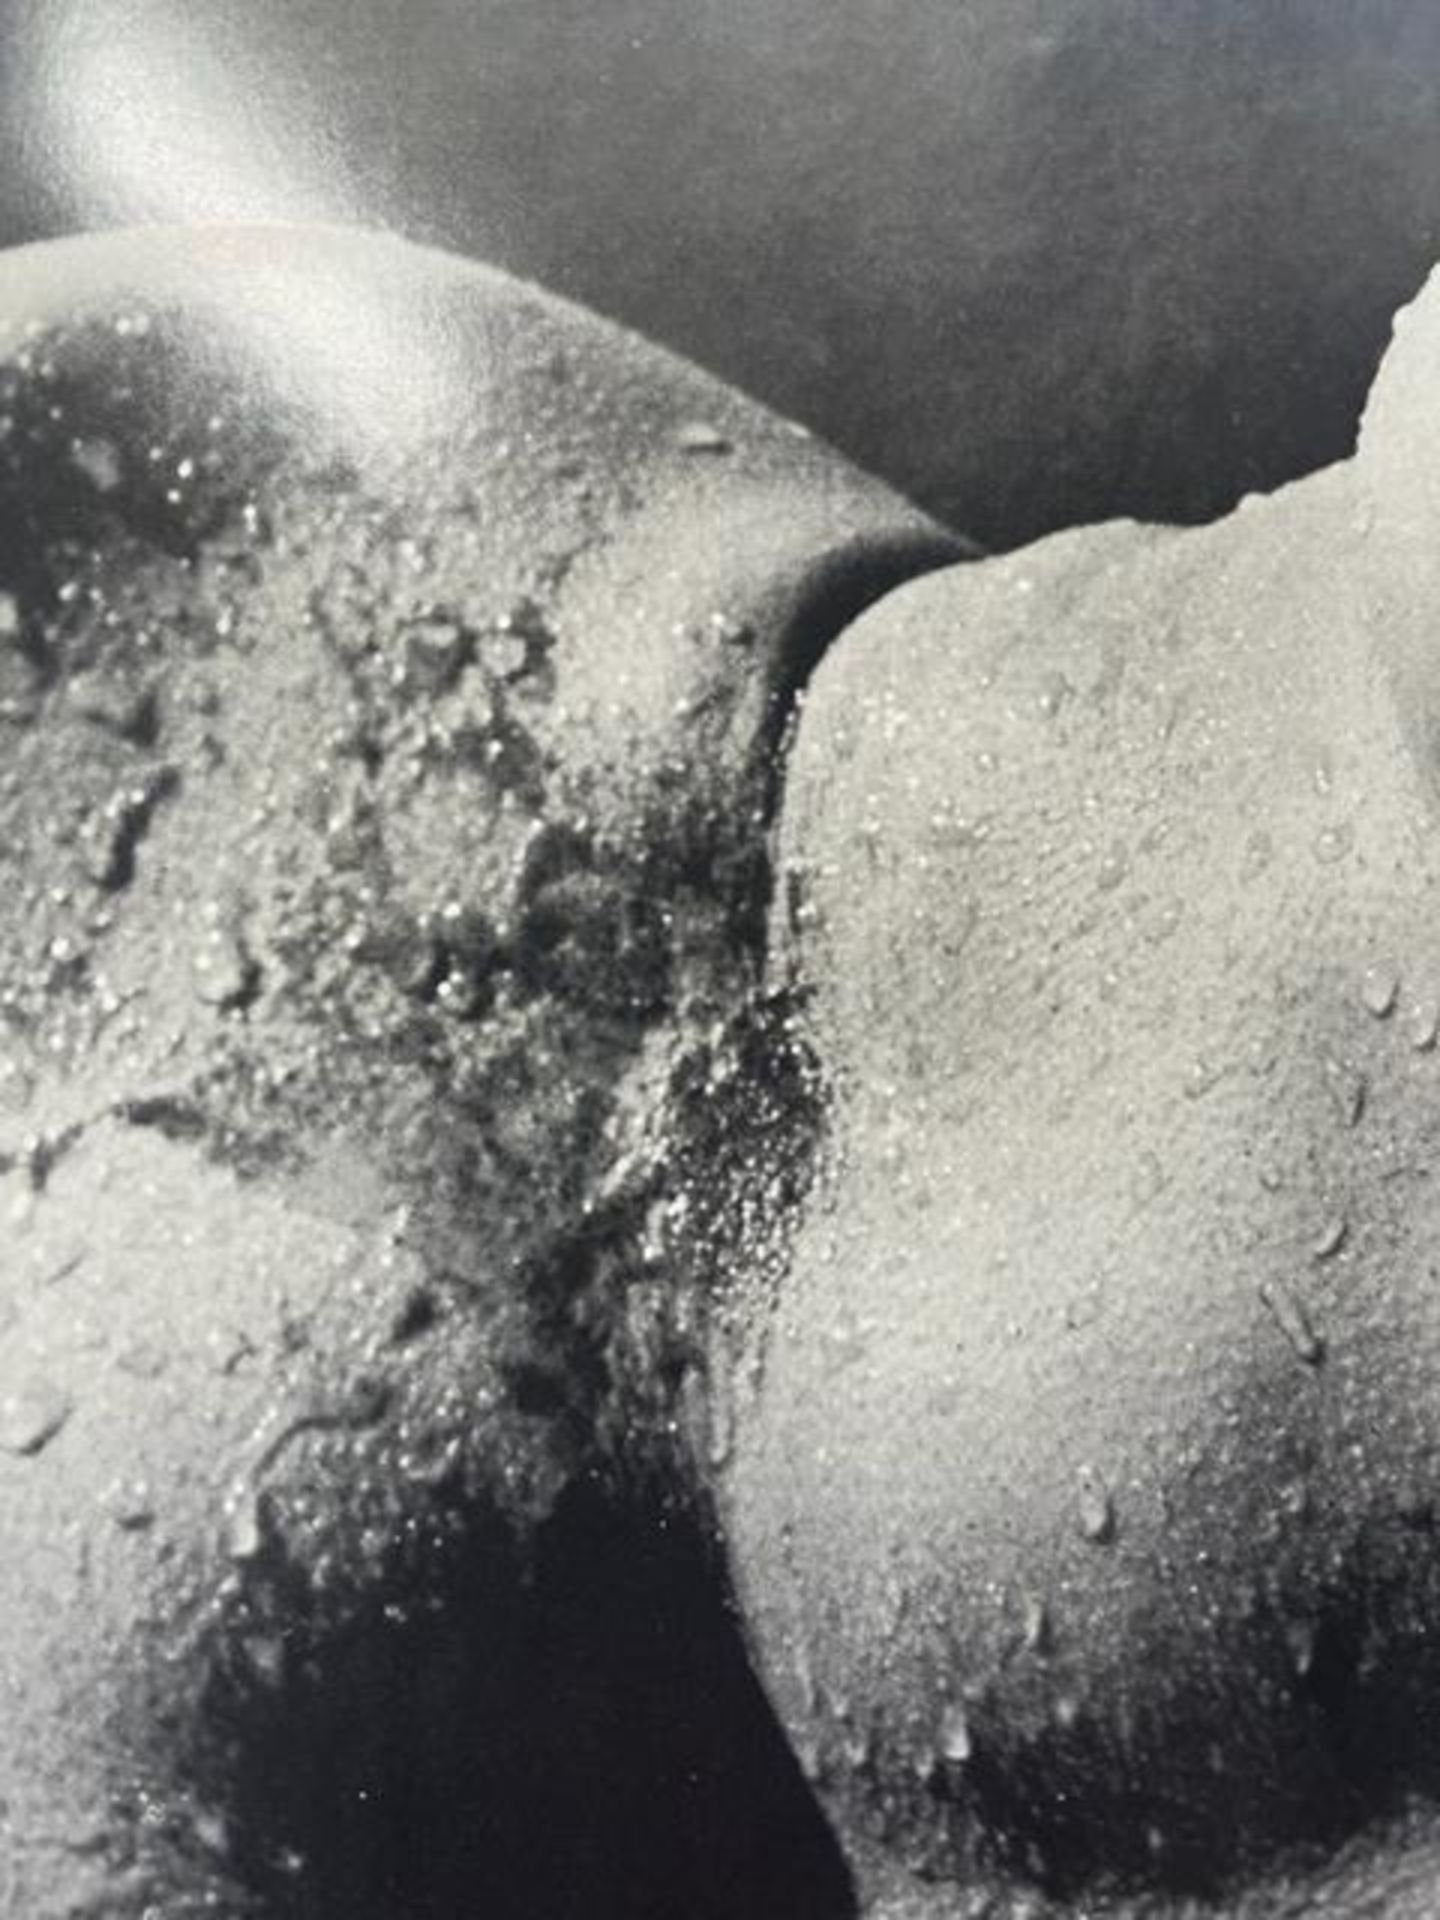 Lucien Clergue "Untitled" - Image 4 of 6